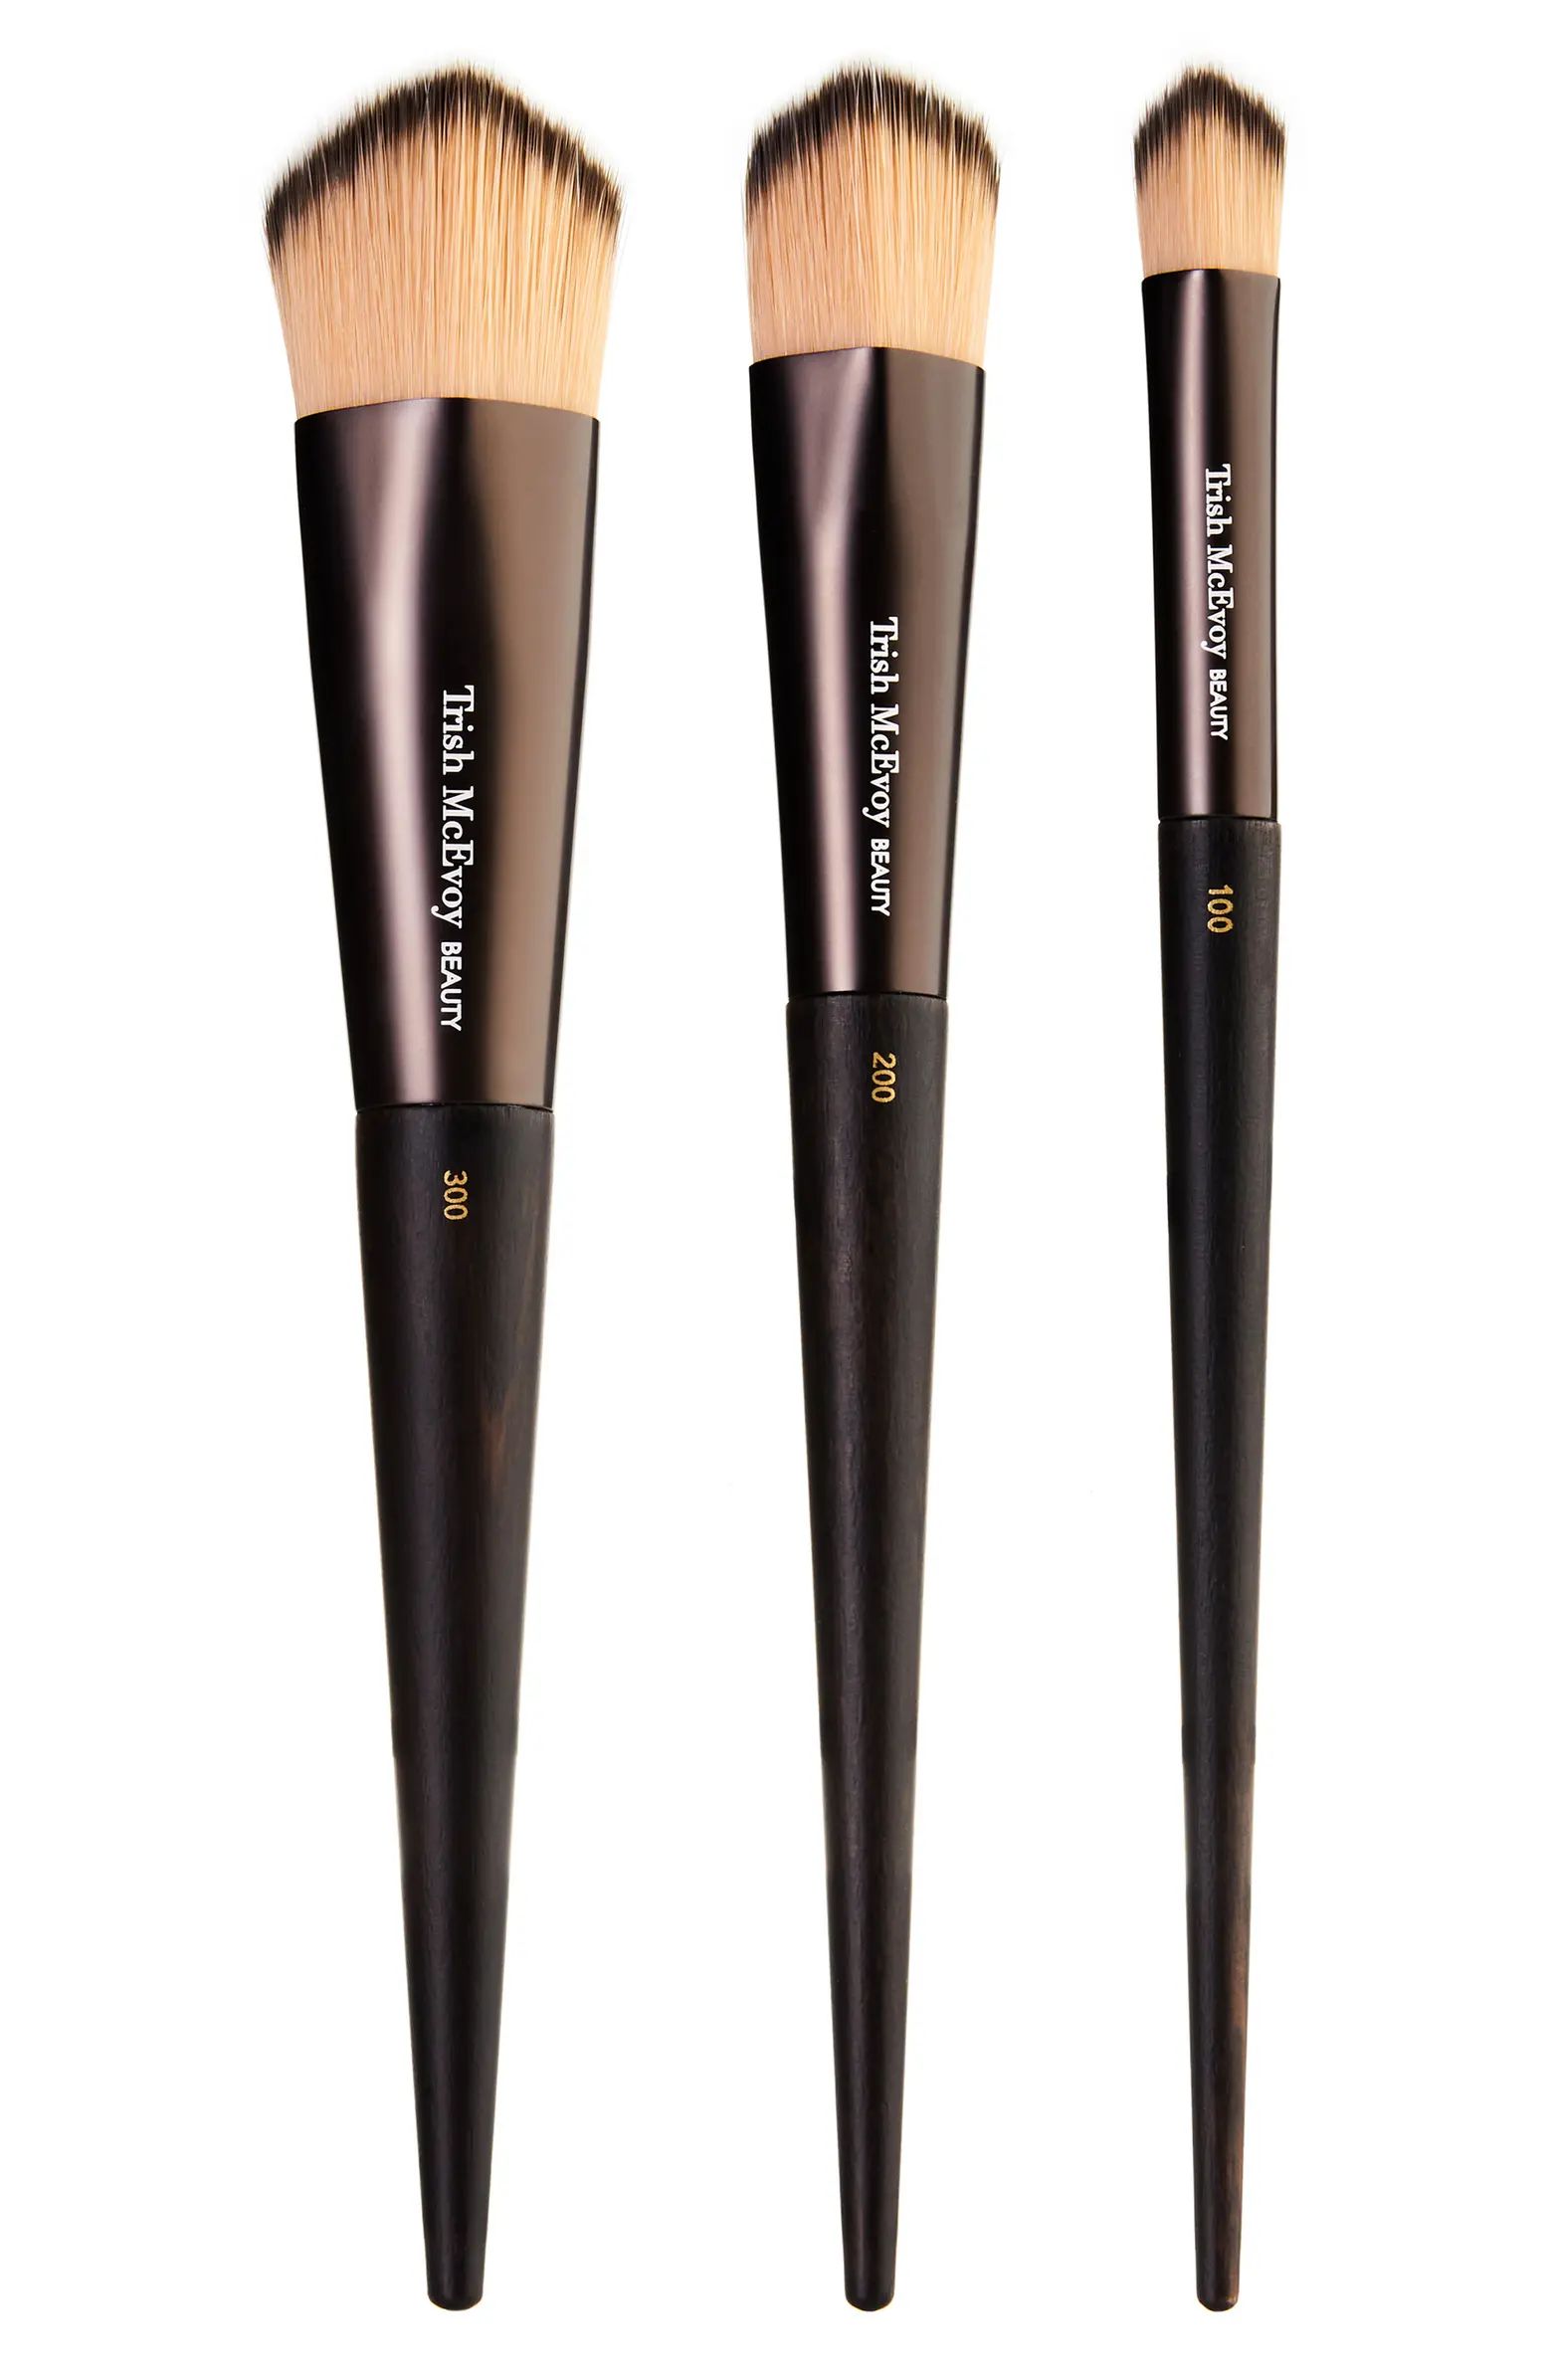 The Power of Brushes® $170 Value | Nordstrom